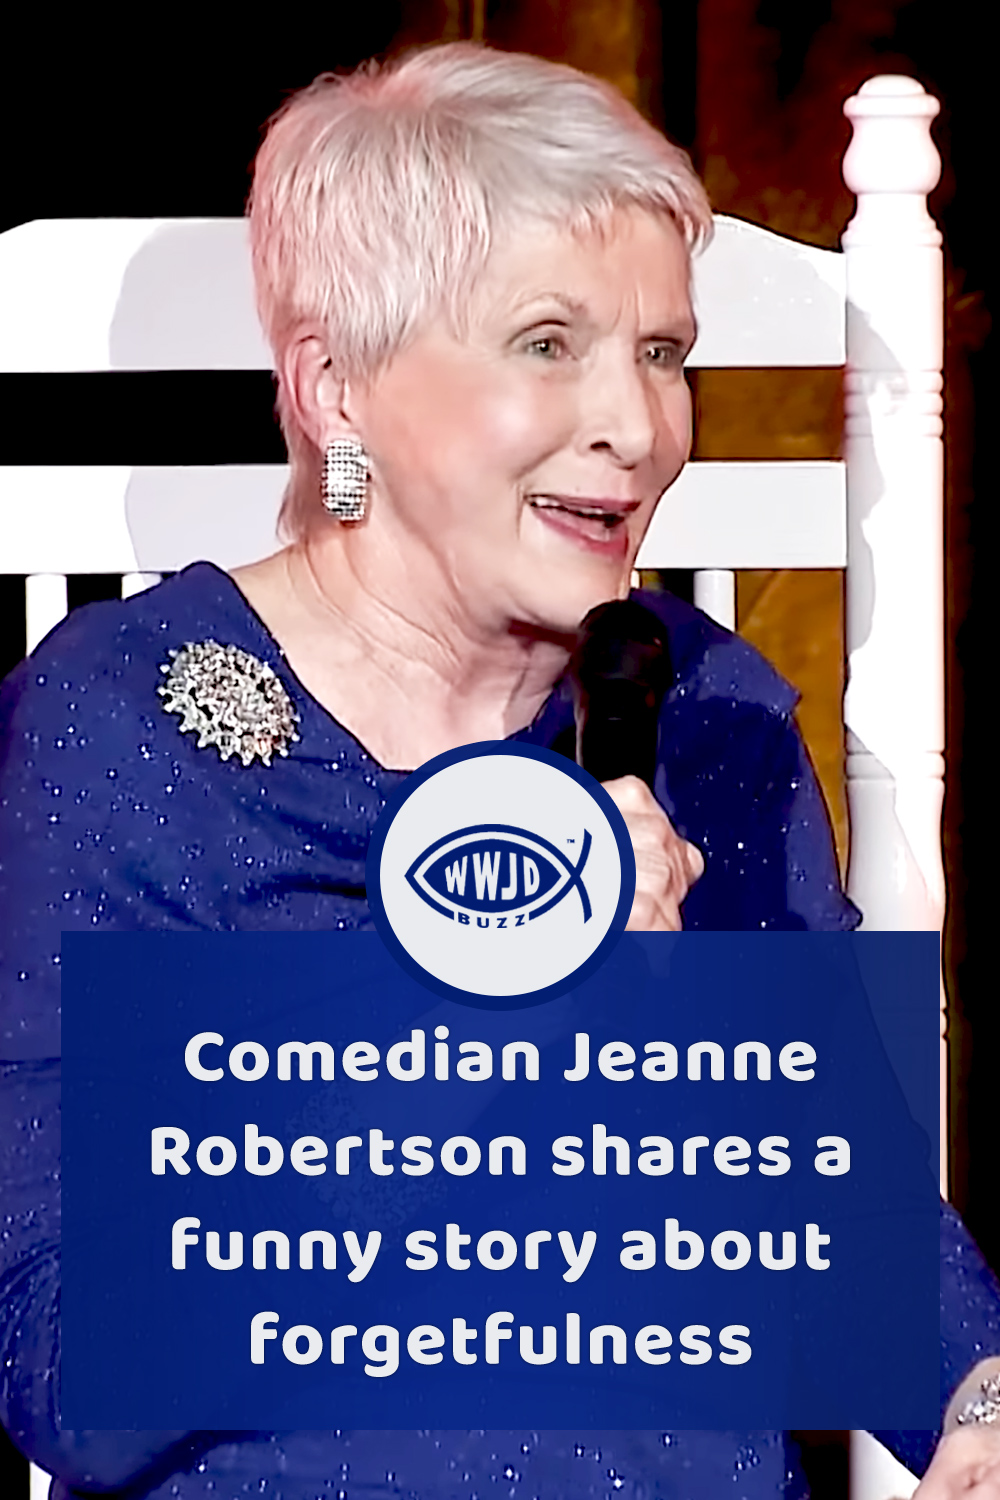 Comedian Jeanne Robertson shares a funny story about forgetfulness